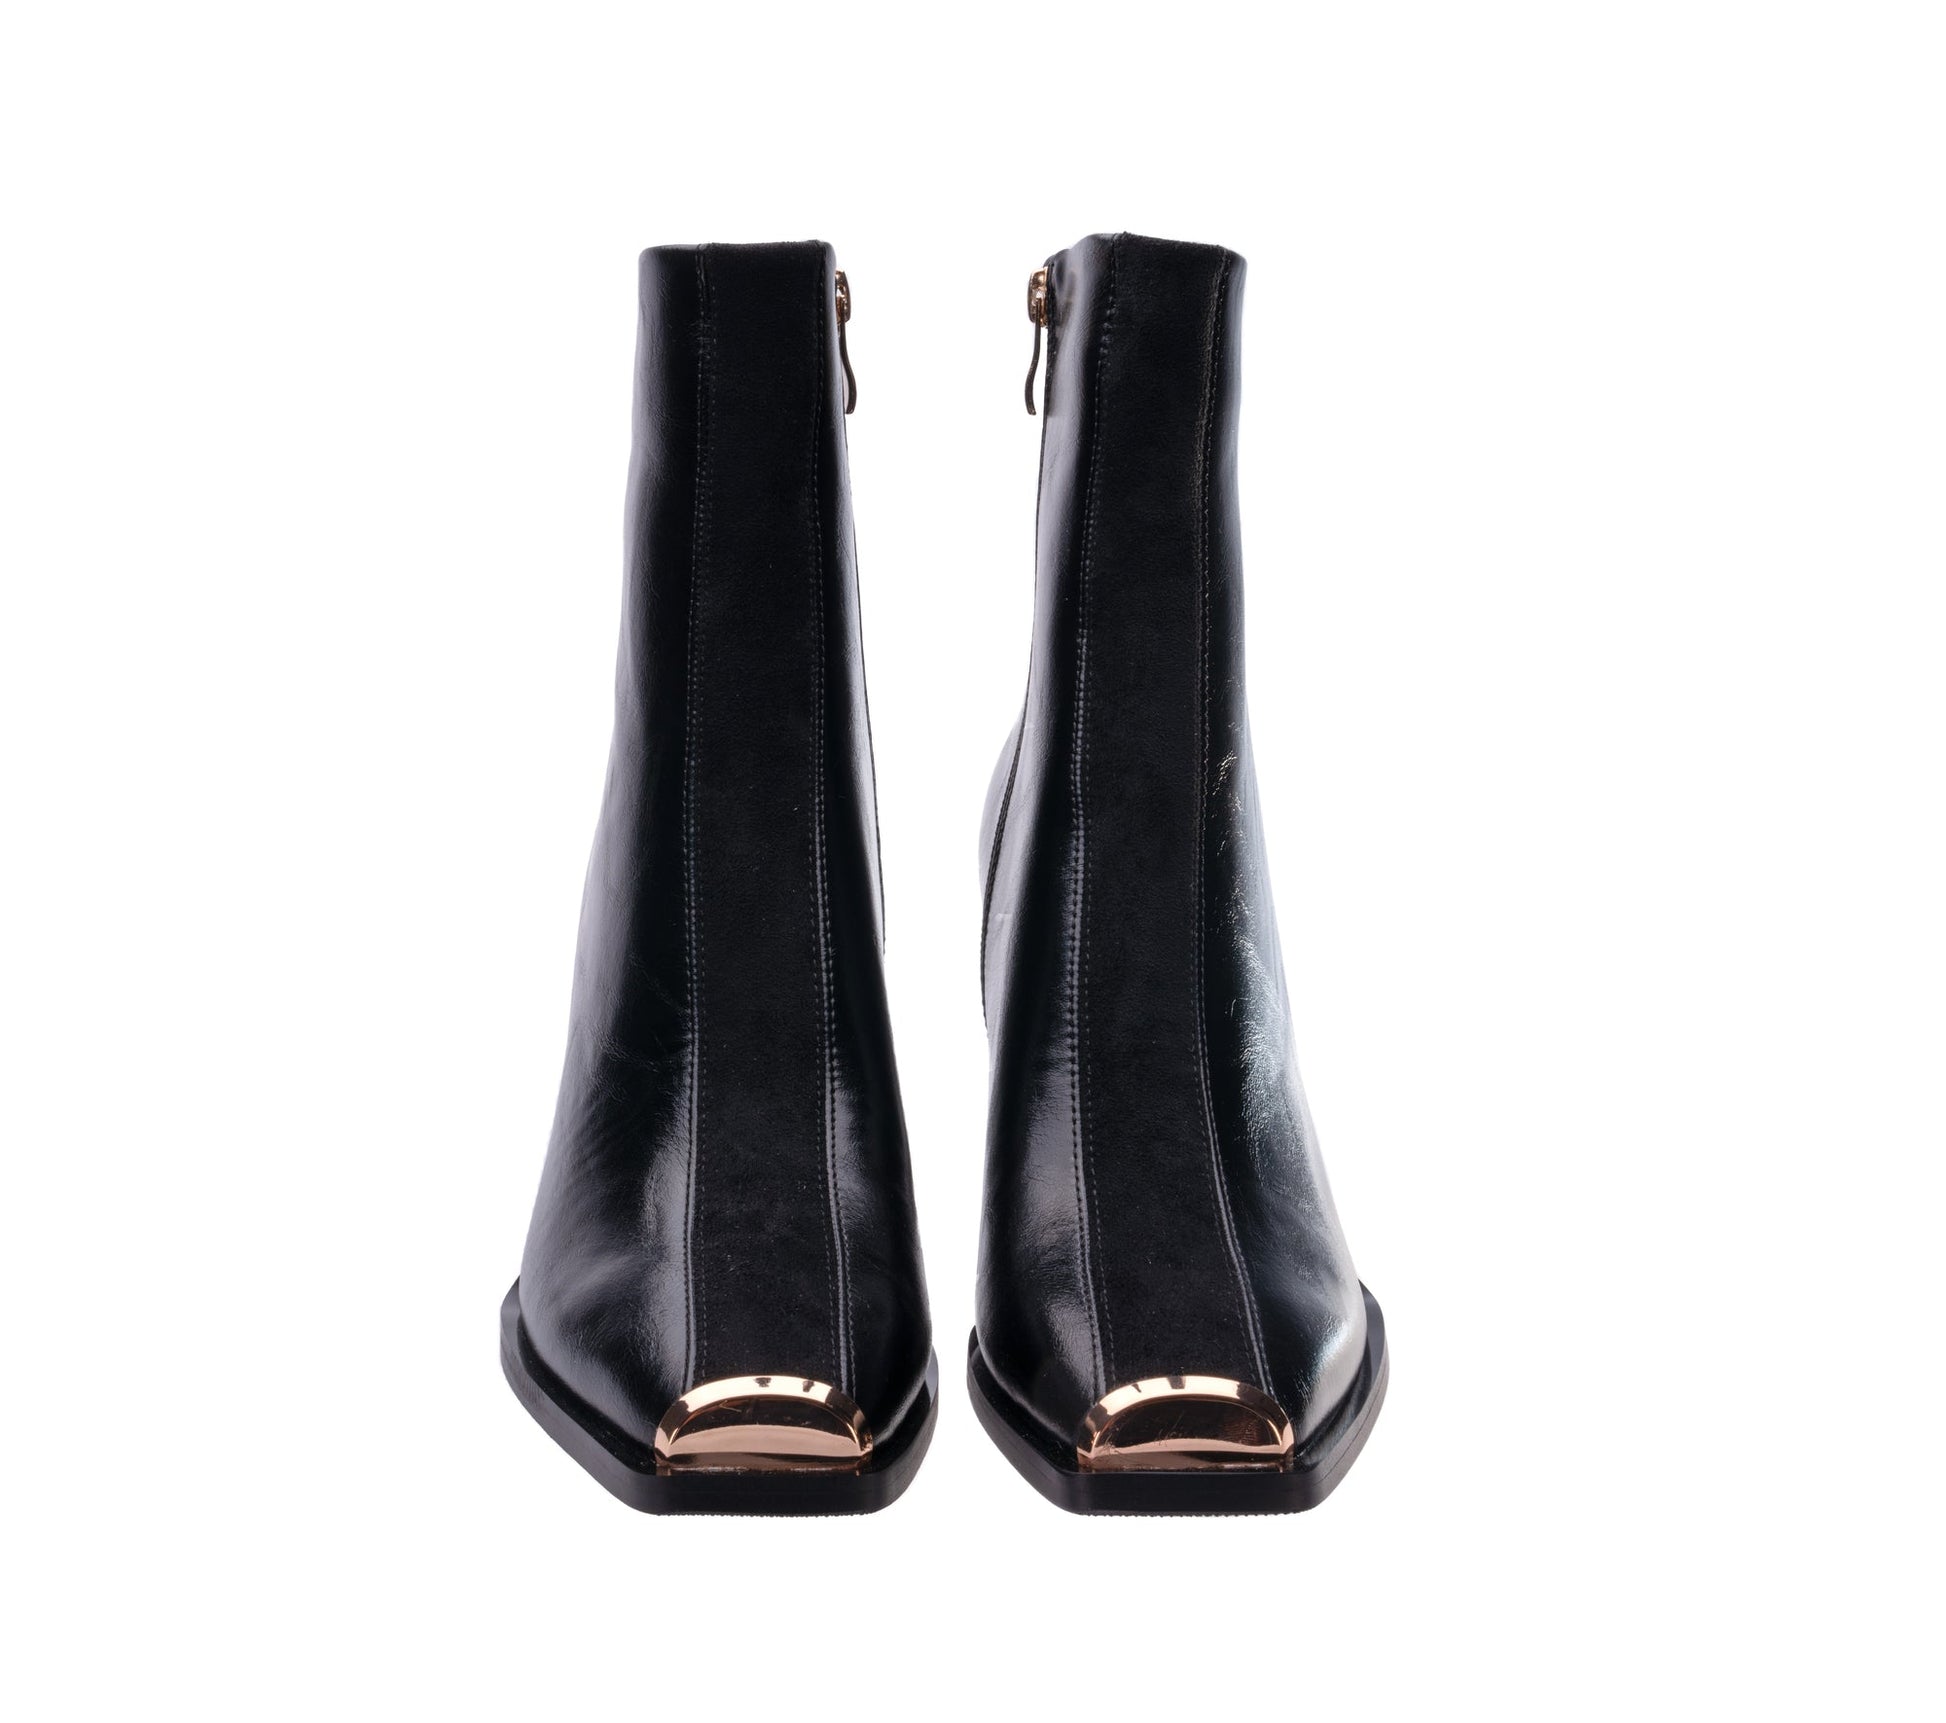 Ninety Union TEMPO Short Bootie With A Square Toe Gold Toe-Tip And Chunky Heel - ninetyunion